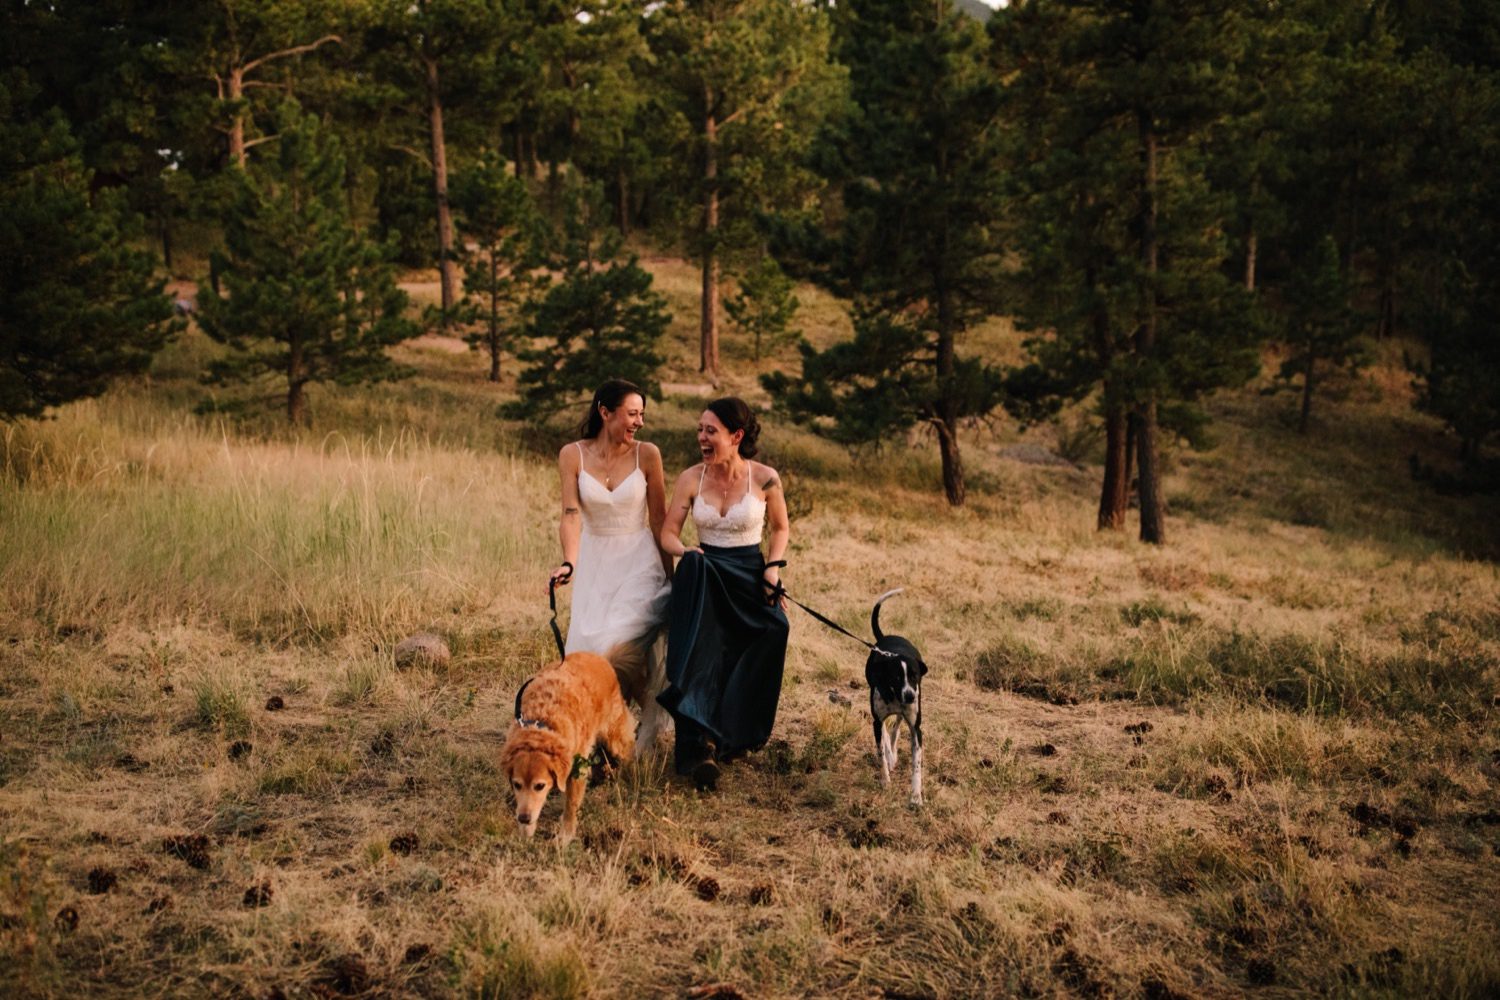 Boulder Colorado Elopement, Boulder Mountain Elopement, Flagstaff Mountain in Boulder, Colorado mountain elopement, Colorado elopement, Places to elope in Colorado, Mountain elopement, Hiking elopement, Elopement Photos, Elopement Ideas, Elopement inspiration, Elopement, Elopement planning, LGBT elopement, same sex elopement, lesbian elopement, Colorado LGBT Elopement Photographer, Colorado LGBT Wedding Photographer, Same sex wedding, Equally Wed, Love is love, Mrs and Mrs, Elopement with dogs